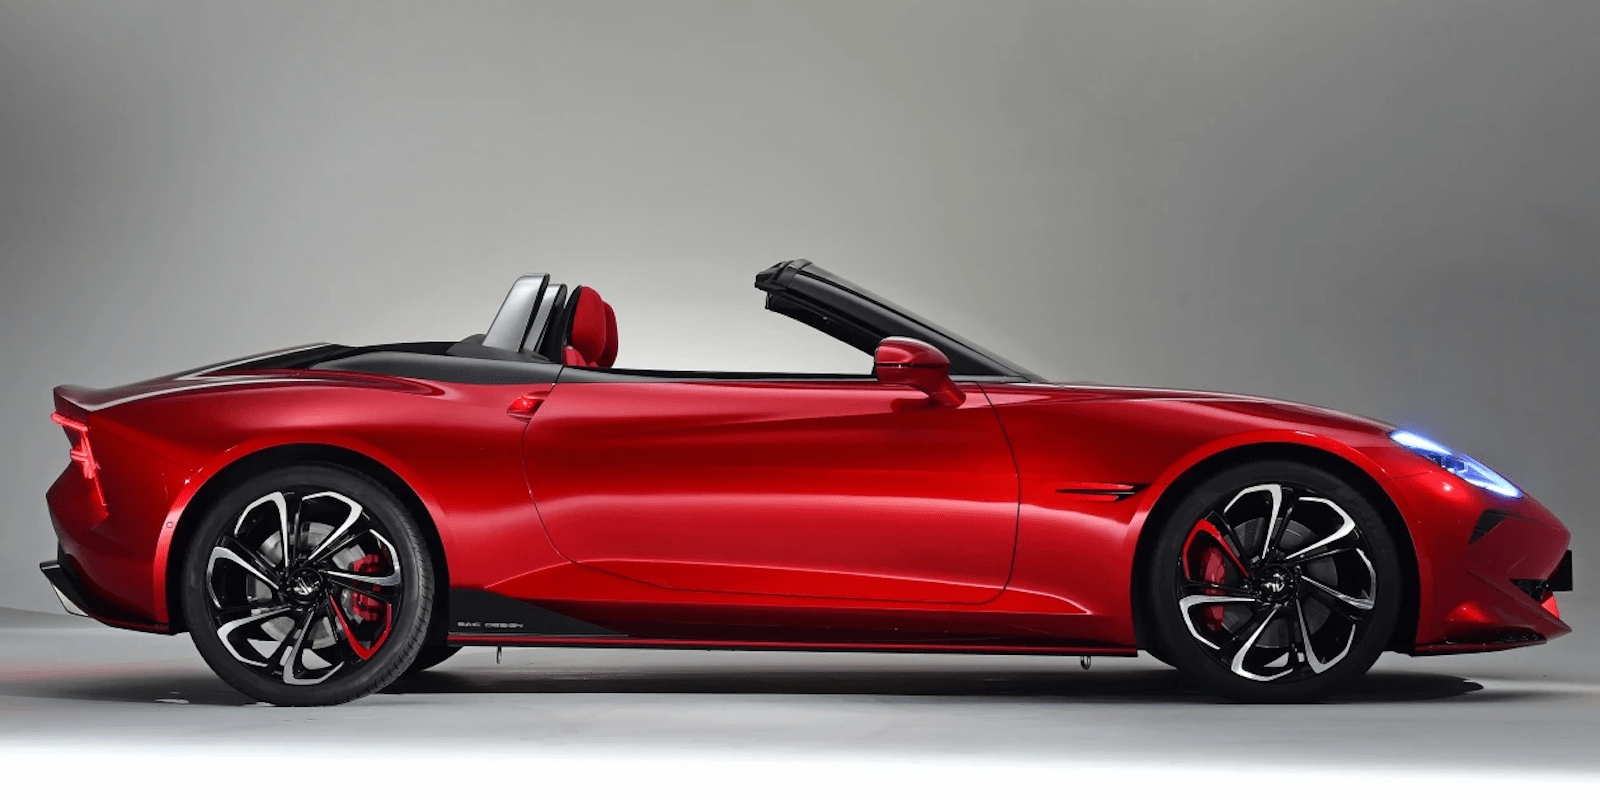 An all-electric roadster, the MG Cyberster will be a unique proposition with a 3.2-second 0-62mph time